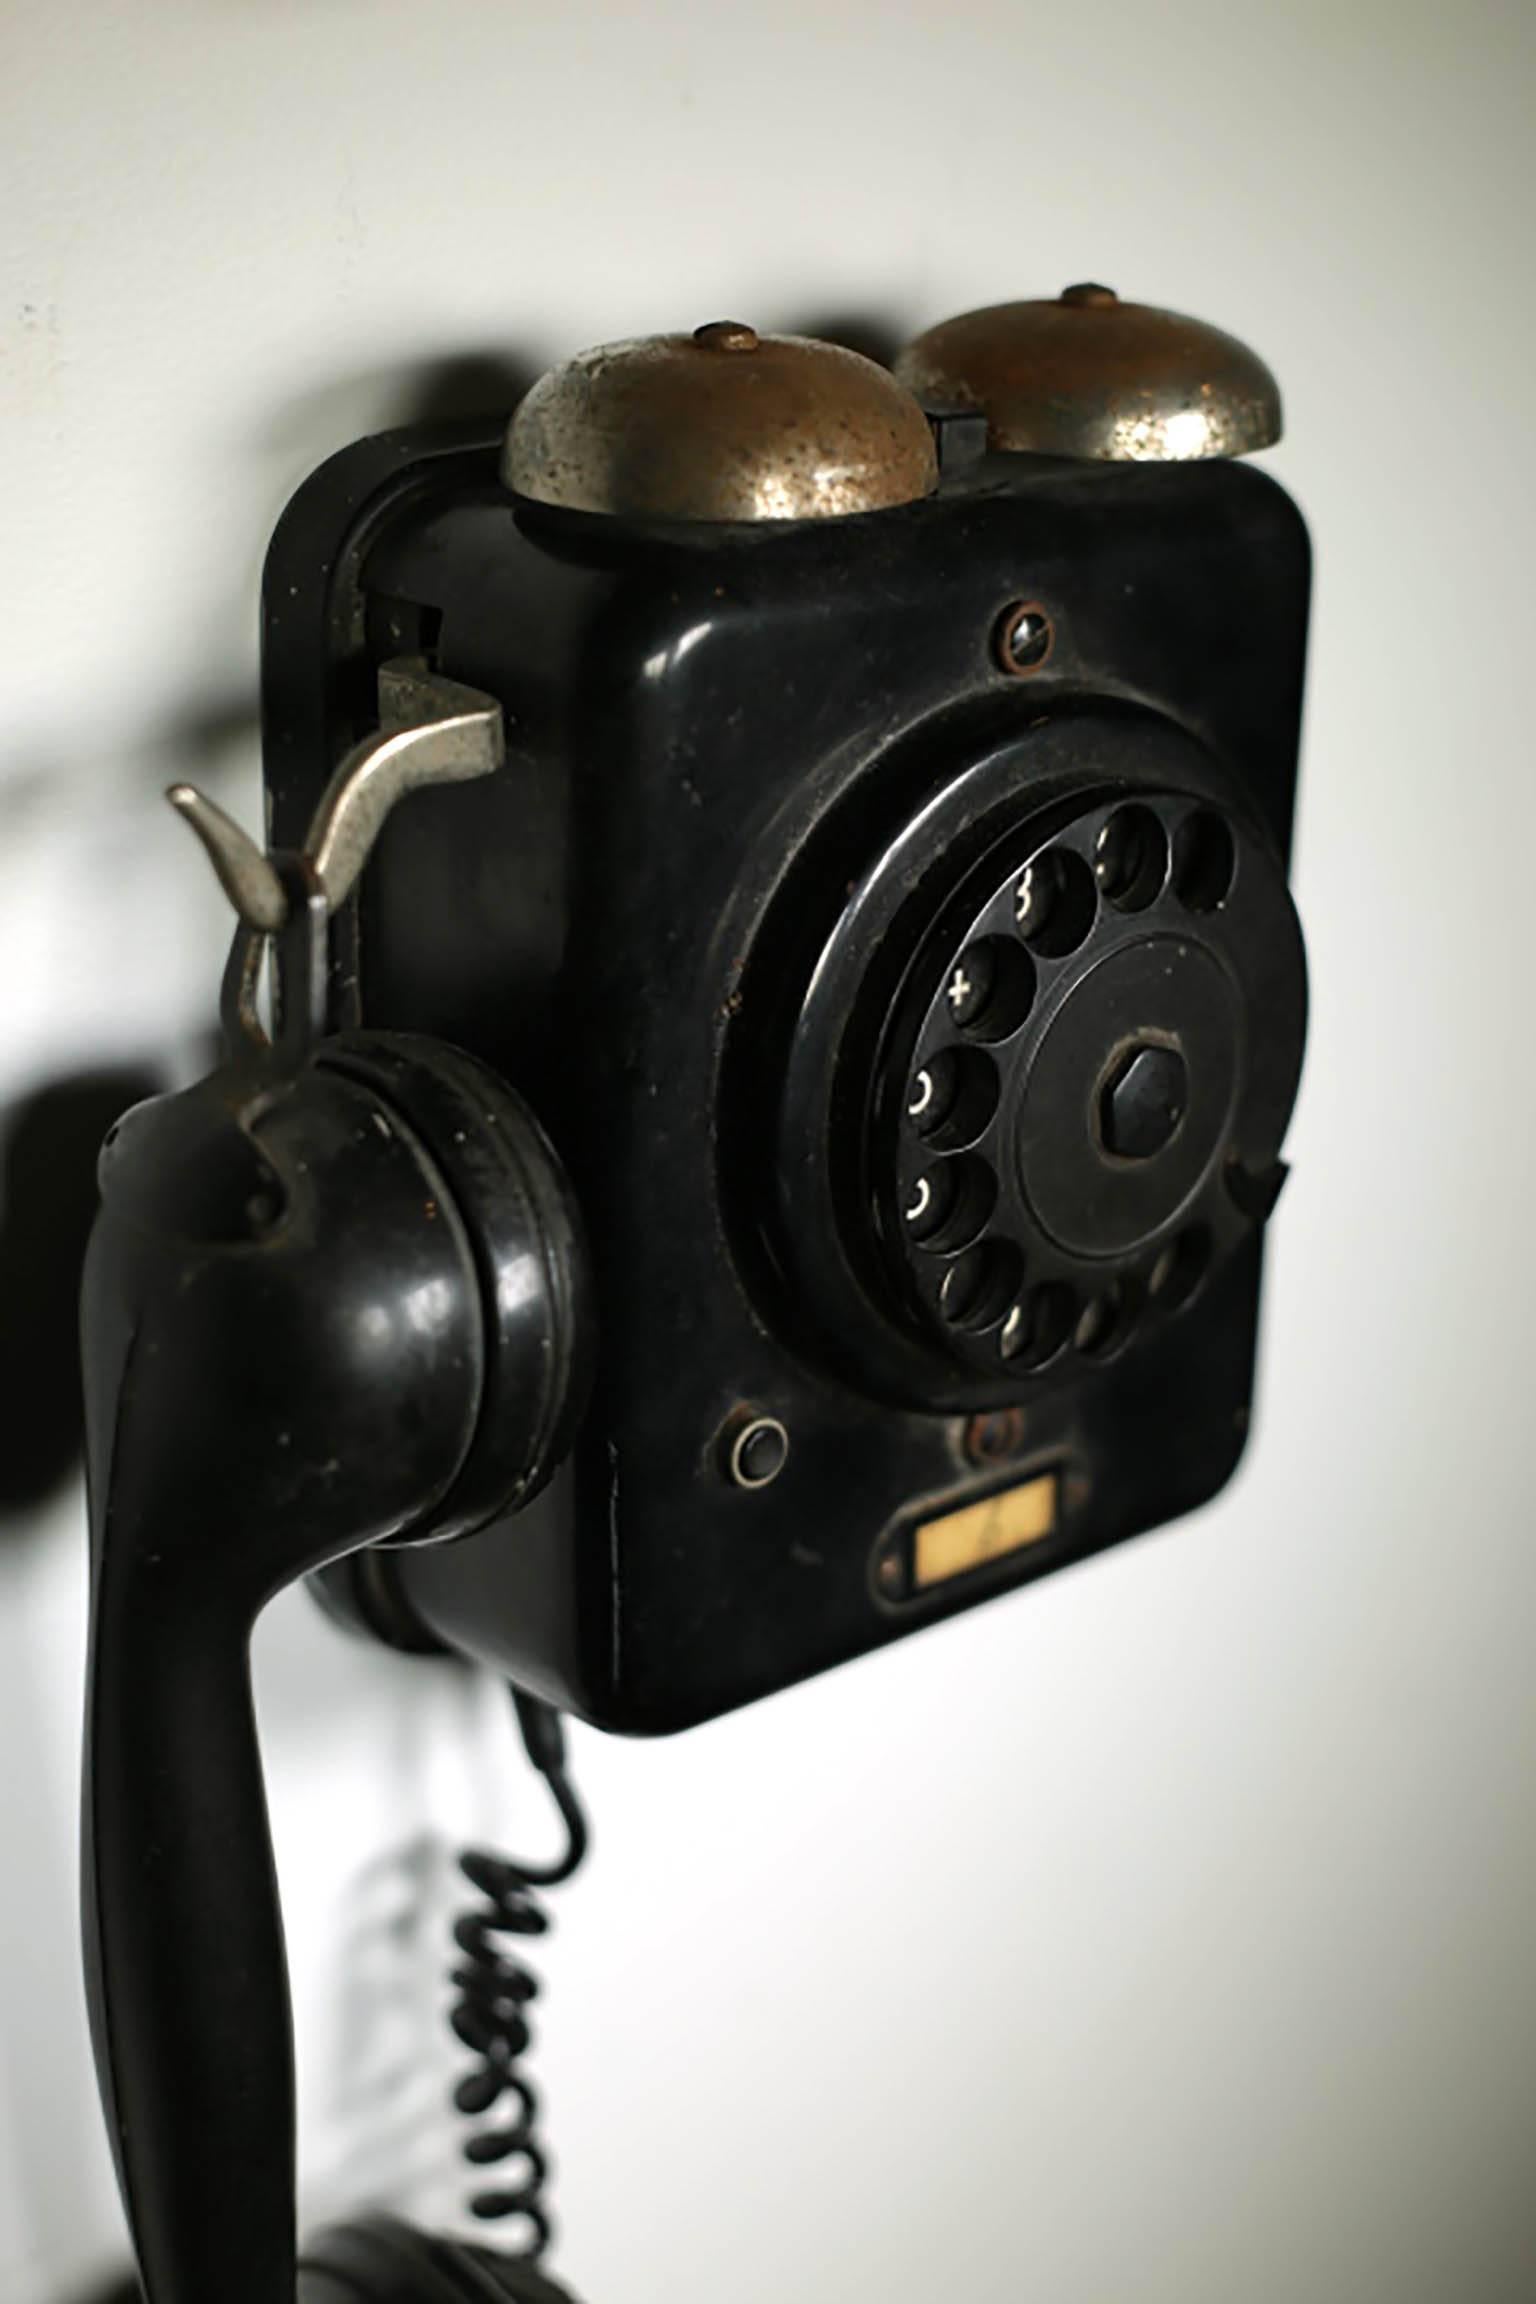 Metal body with a Bakelite rotary dial telephone, circa 1950s. Might possible work if hooked up. The dial works properly.